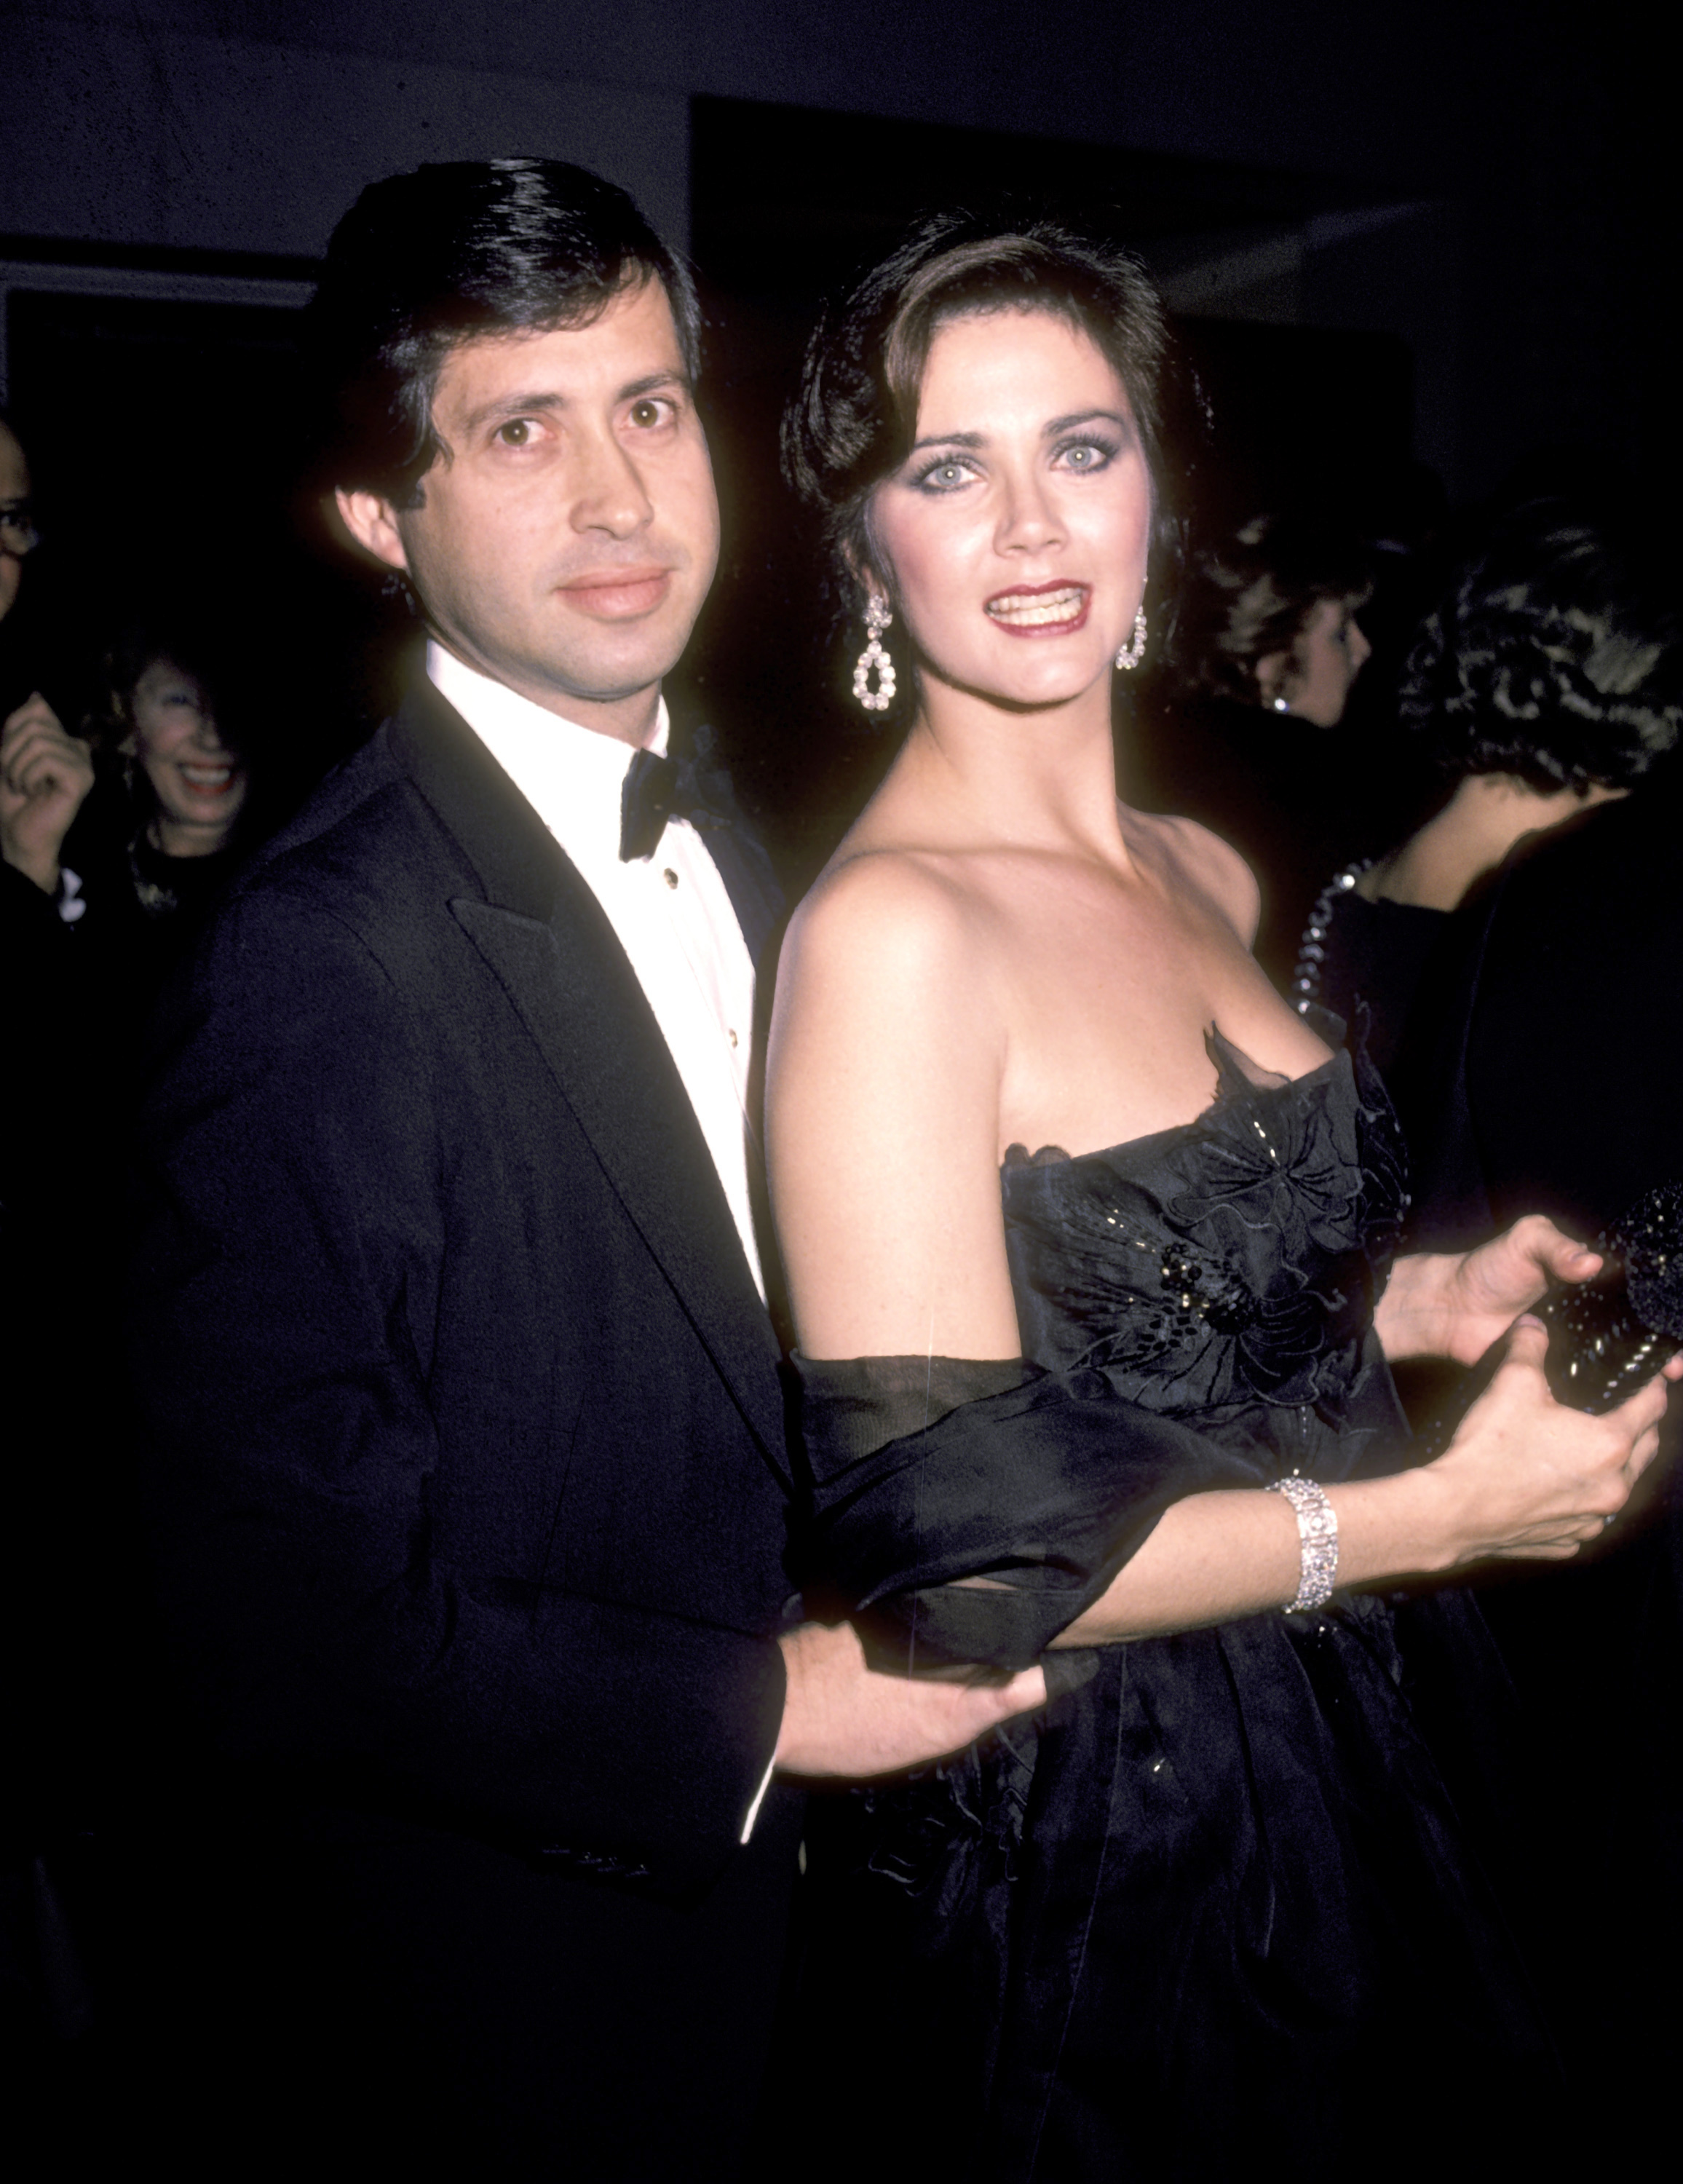 Robert A. Altman and Lynda Carter at the 6th Annual Kennedy Center Honors Gala in Washington, D.C. in 1983 | Source: Getty Images